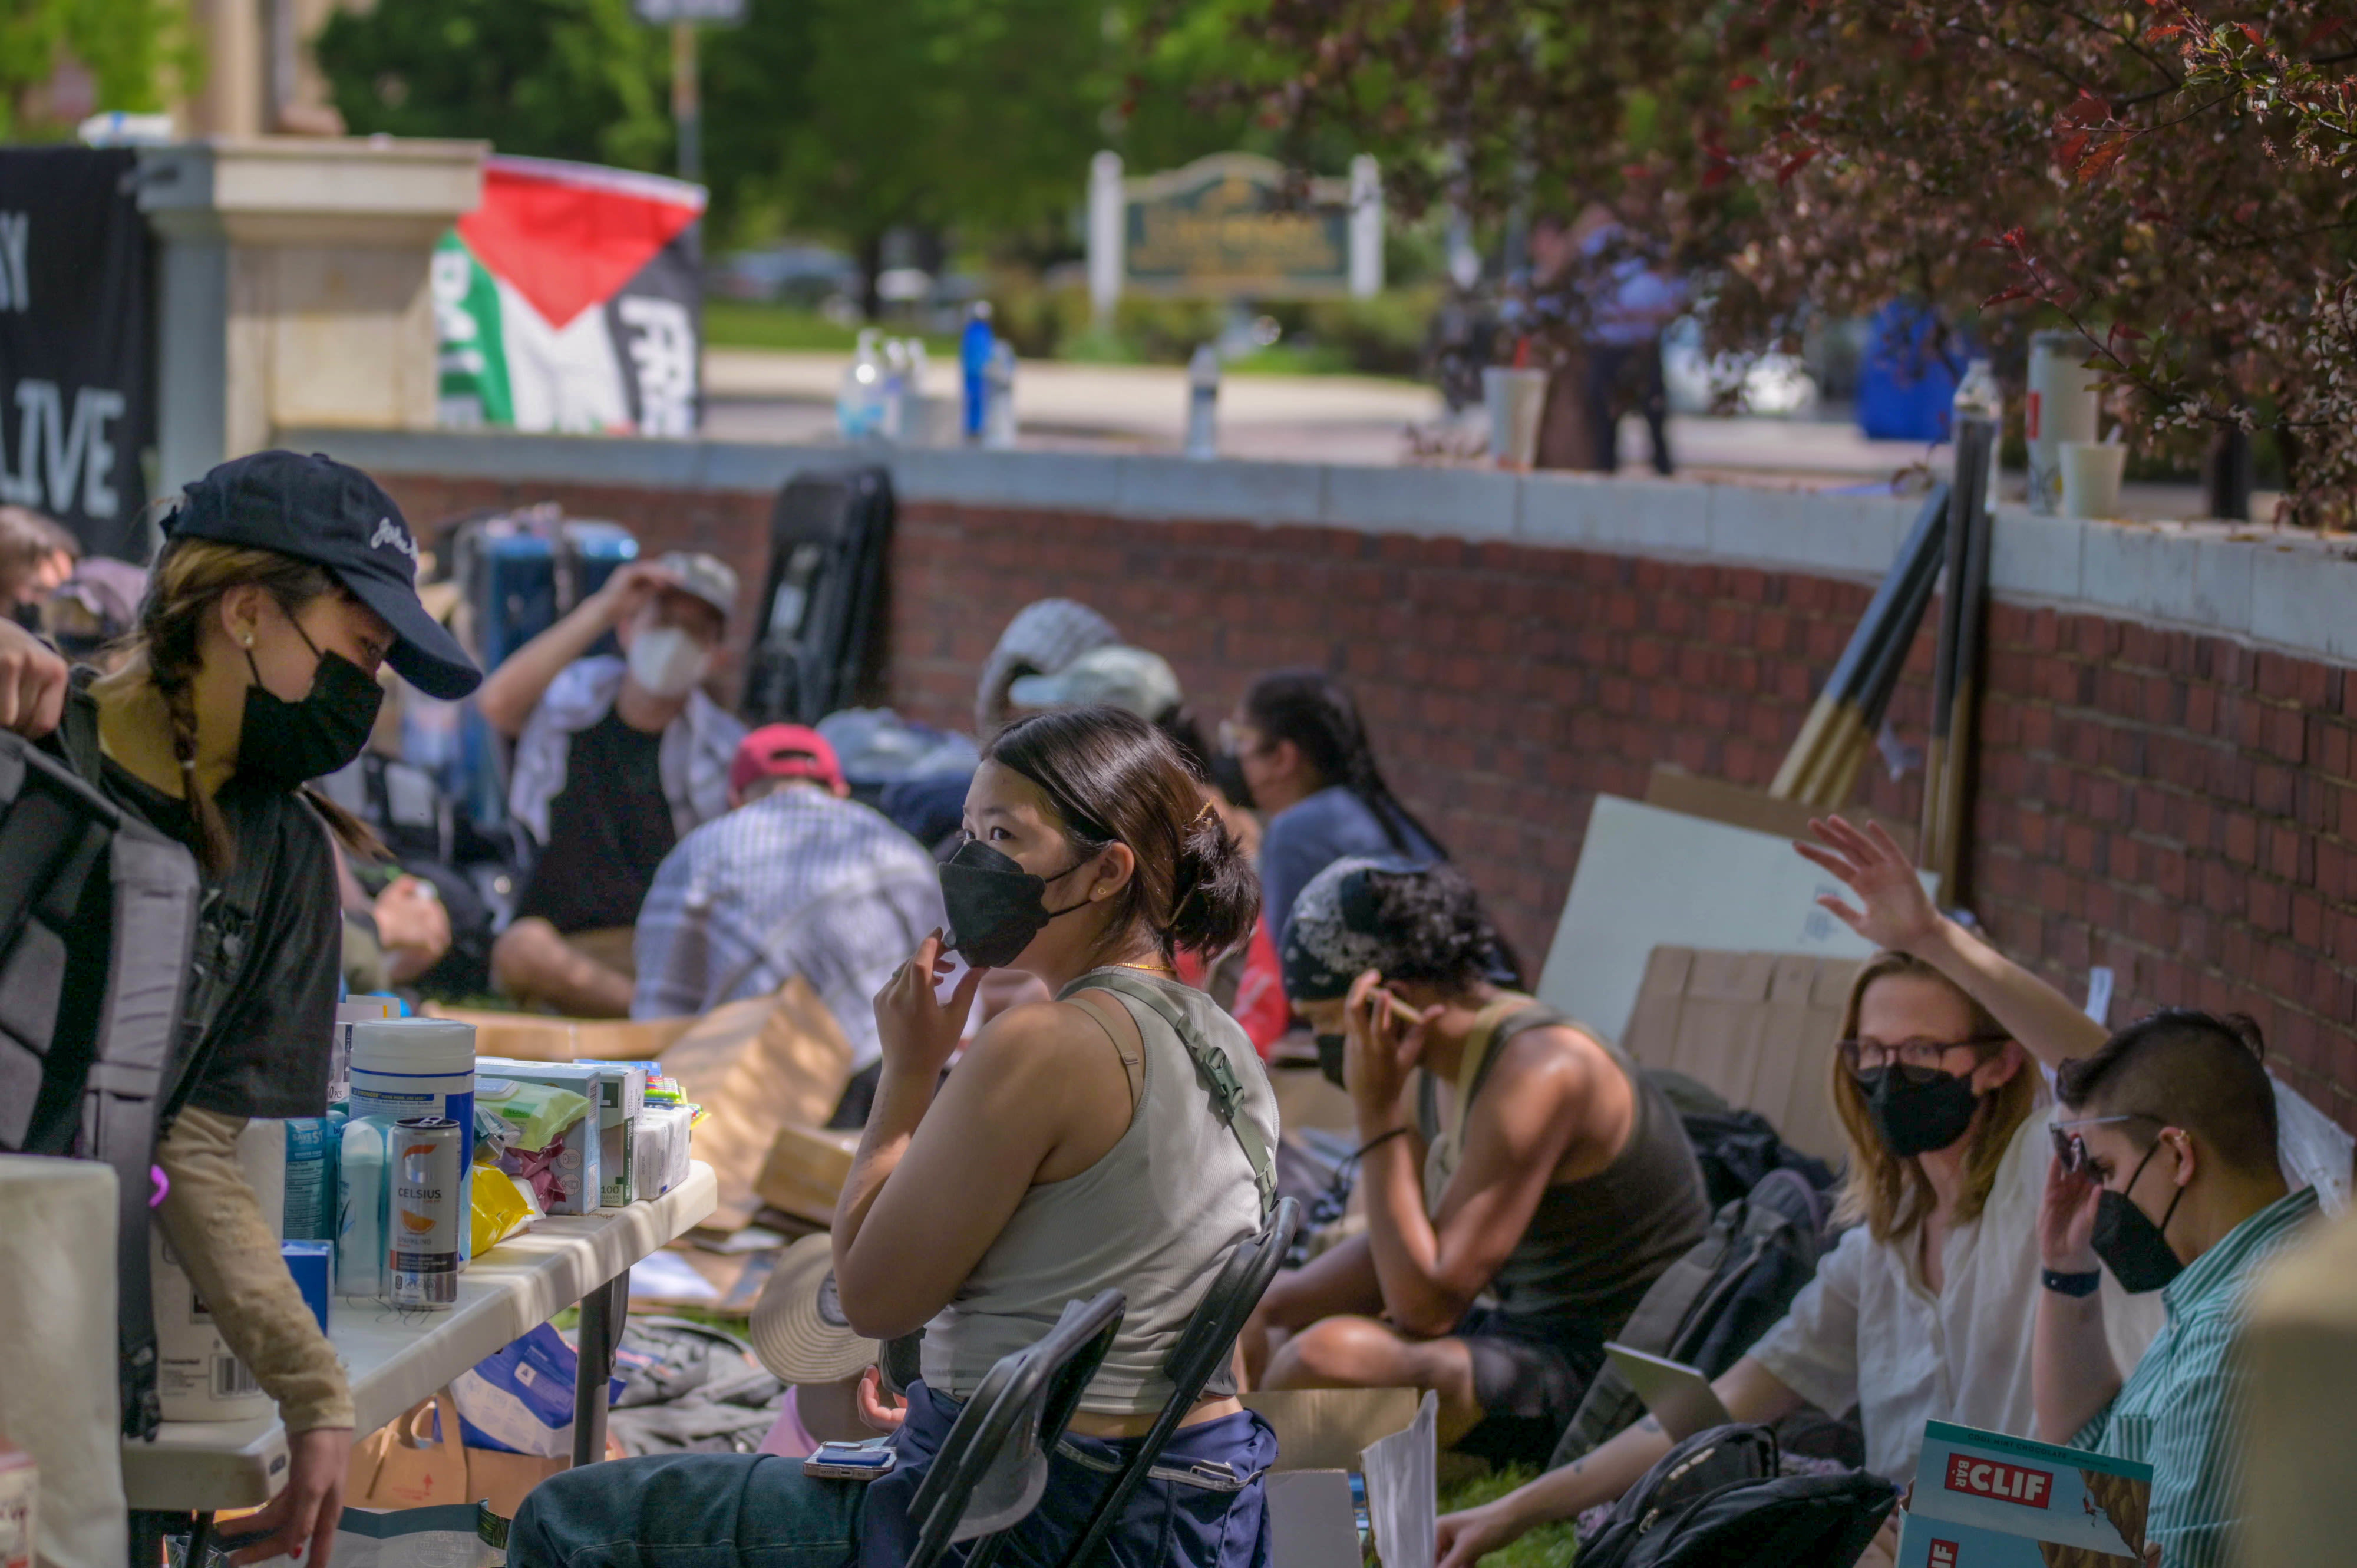 Johns Hopkins administrators, protesters fail to reach solution over pro-Palestinian encampment